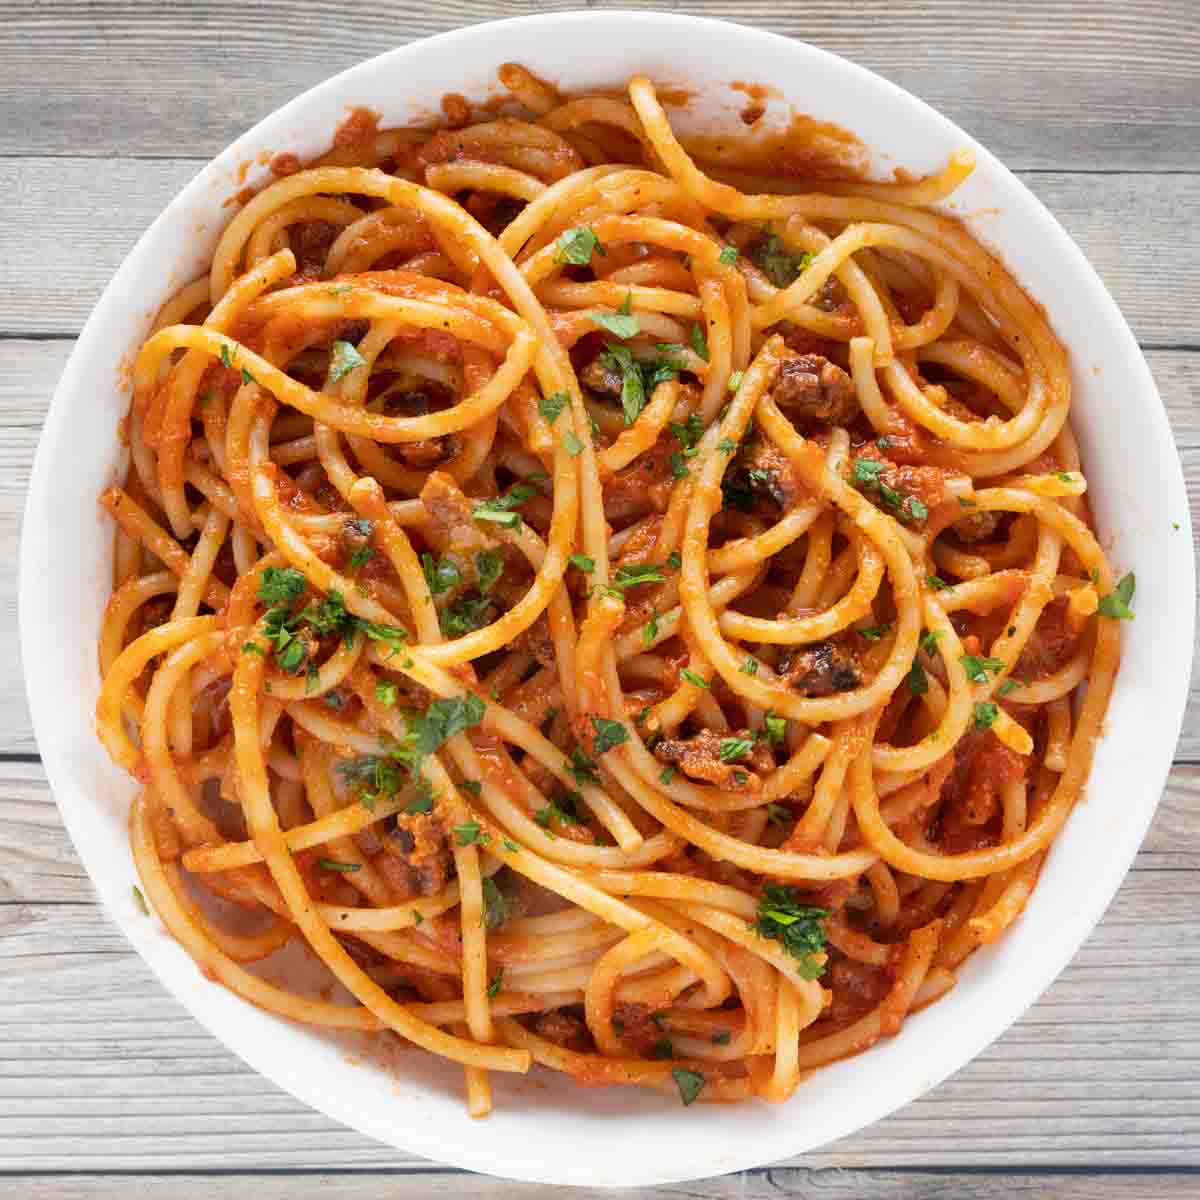 bucatini all' amatriciana in a white bowl